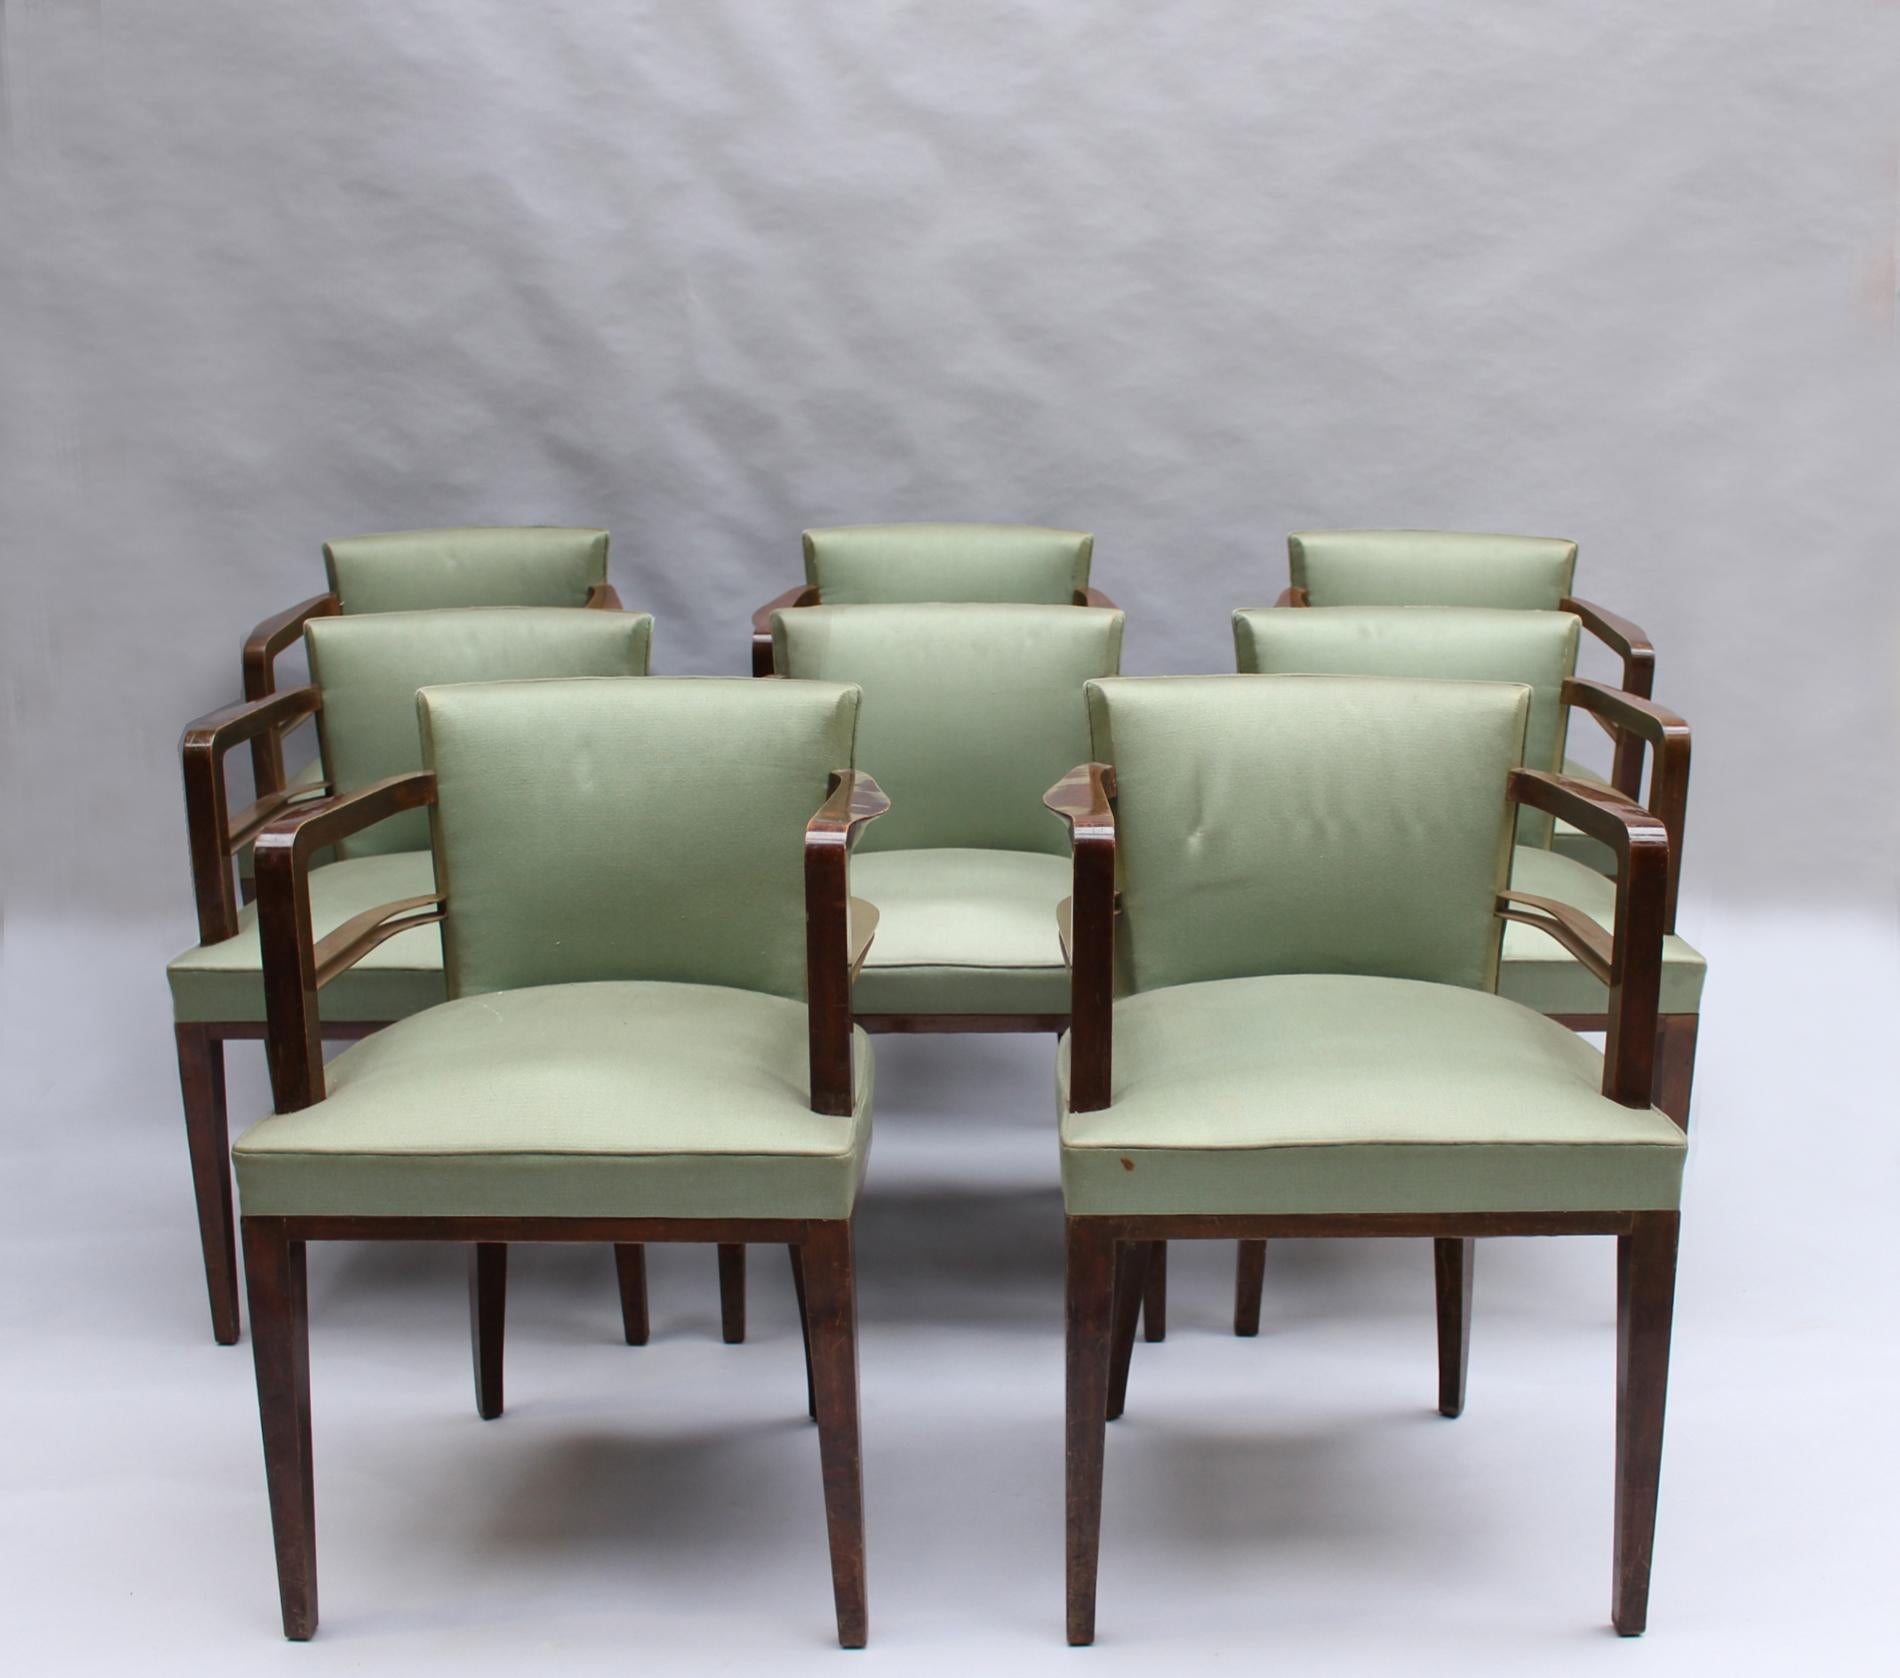 Jean Pascaud - A set of eight fine French Art Deco dining / side chairs in stained wood adorned with brass arm supports.
Documented in the magazine 